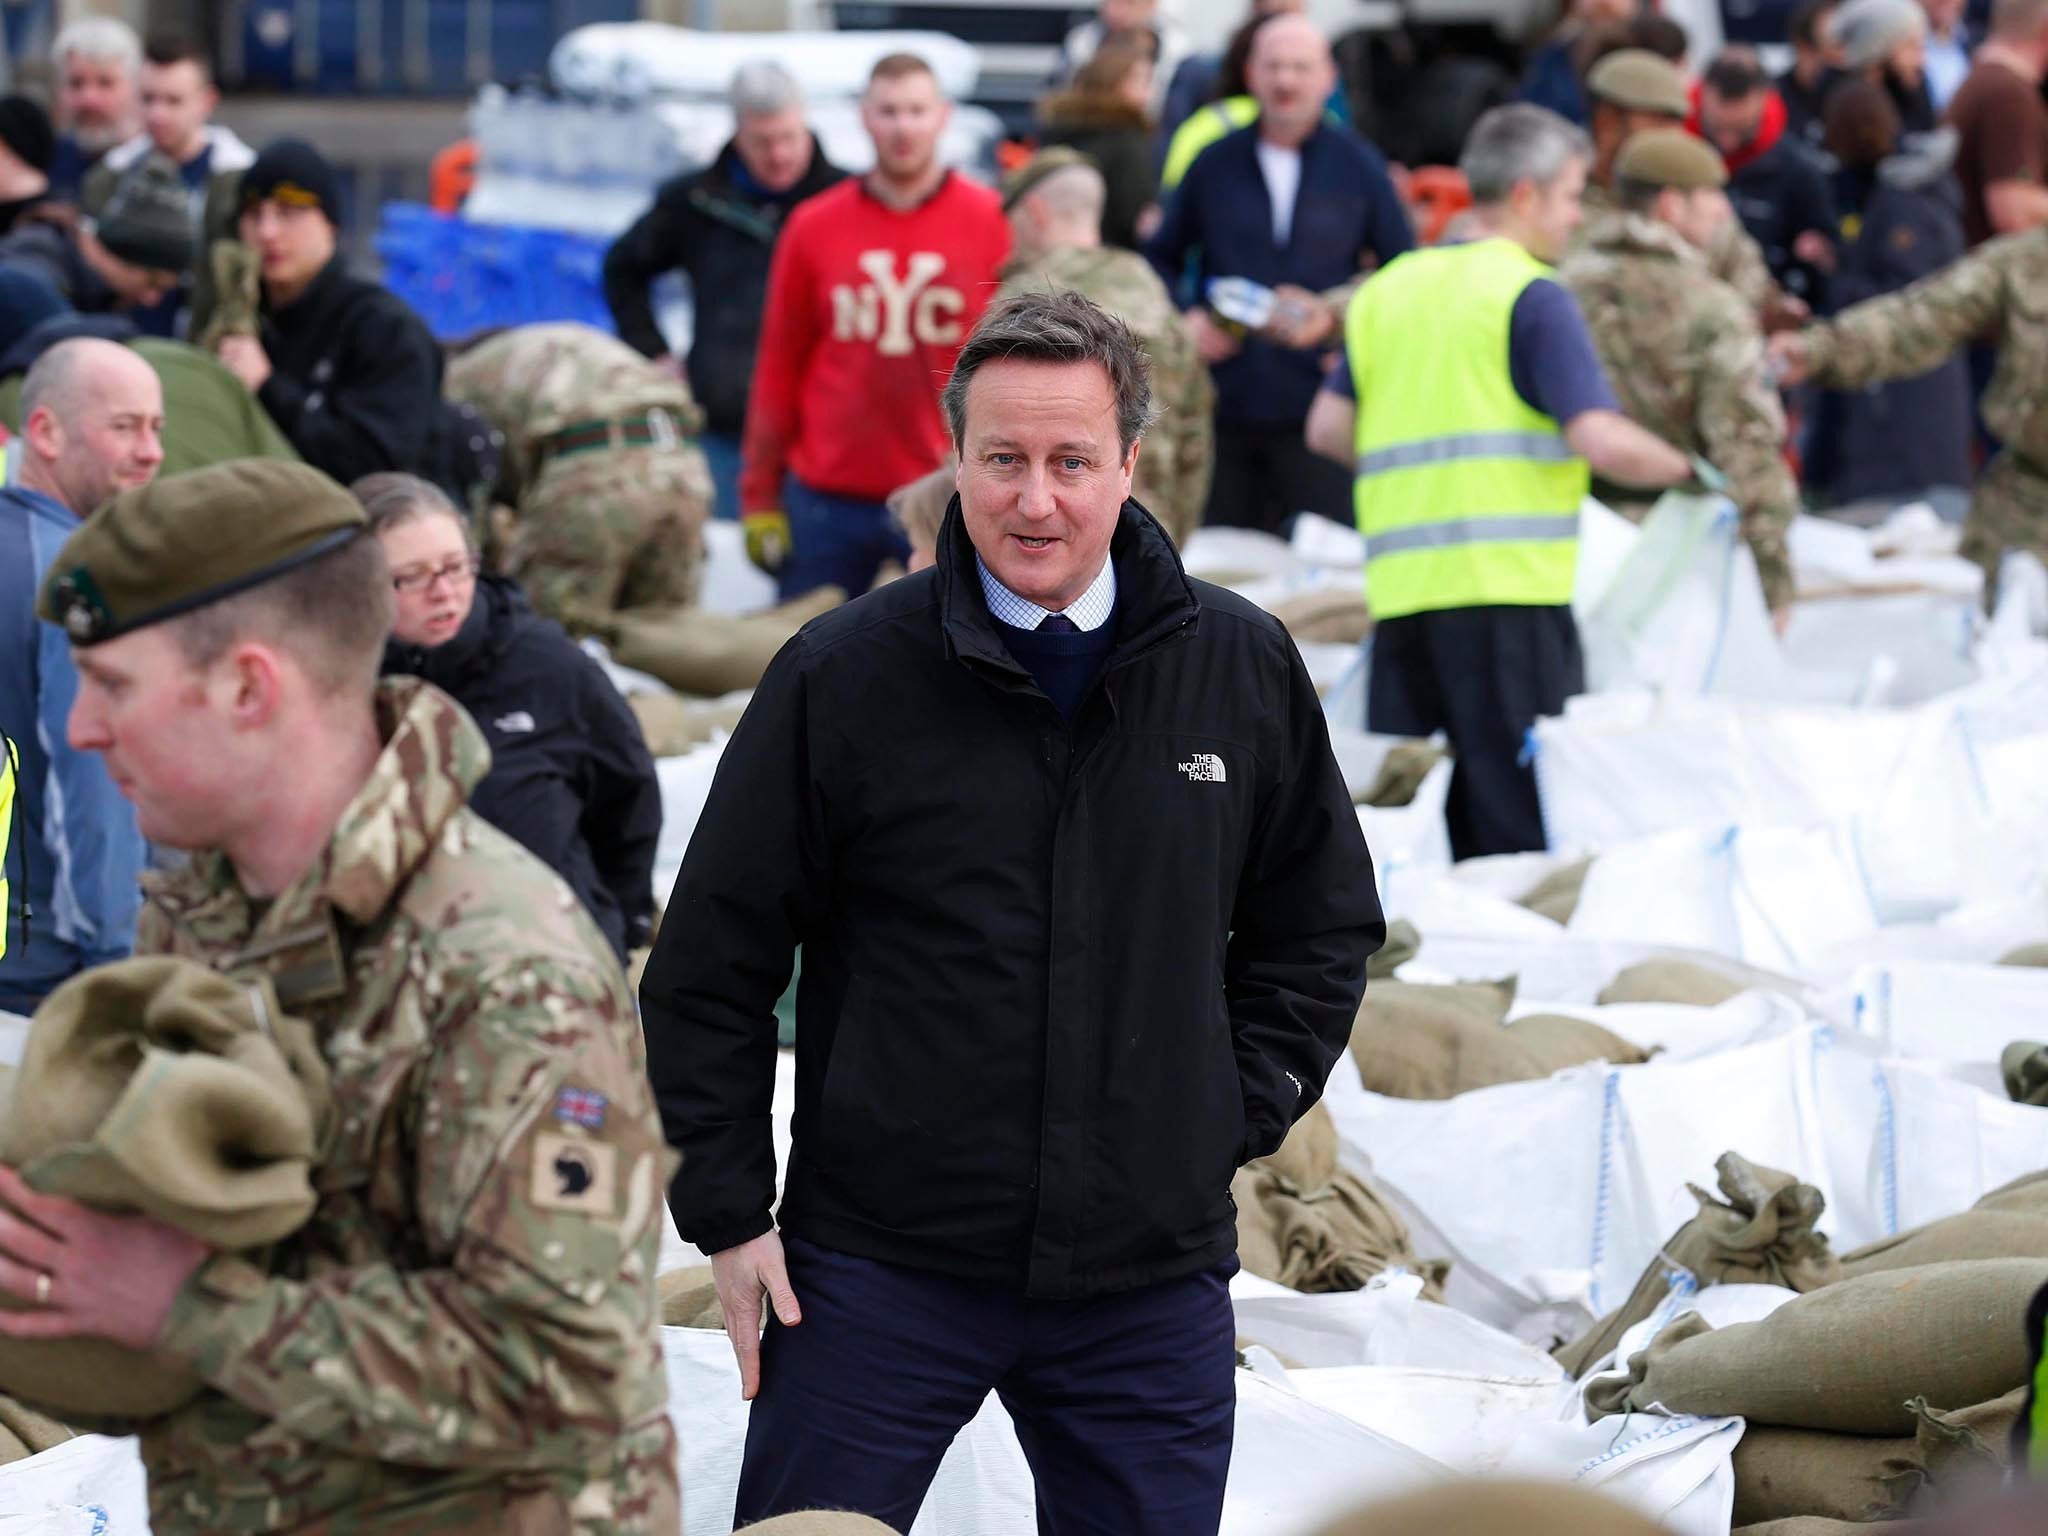 David Cameron visits a local council depot as local volunteers and the British Army fill sandbags to stem flood water in York city centre